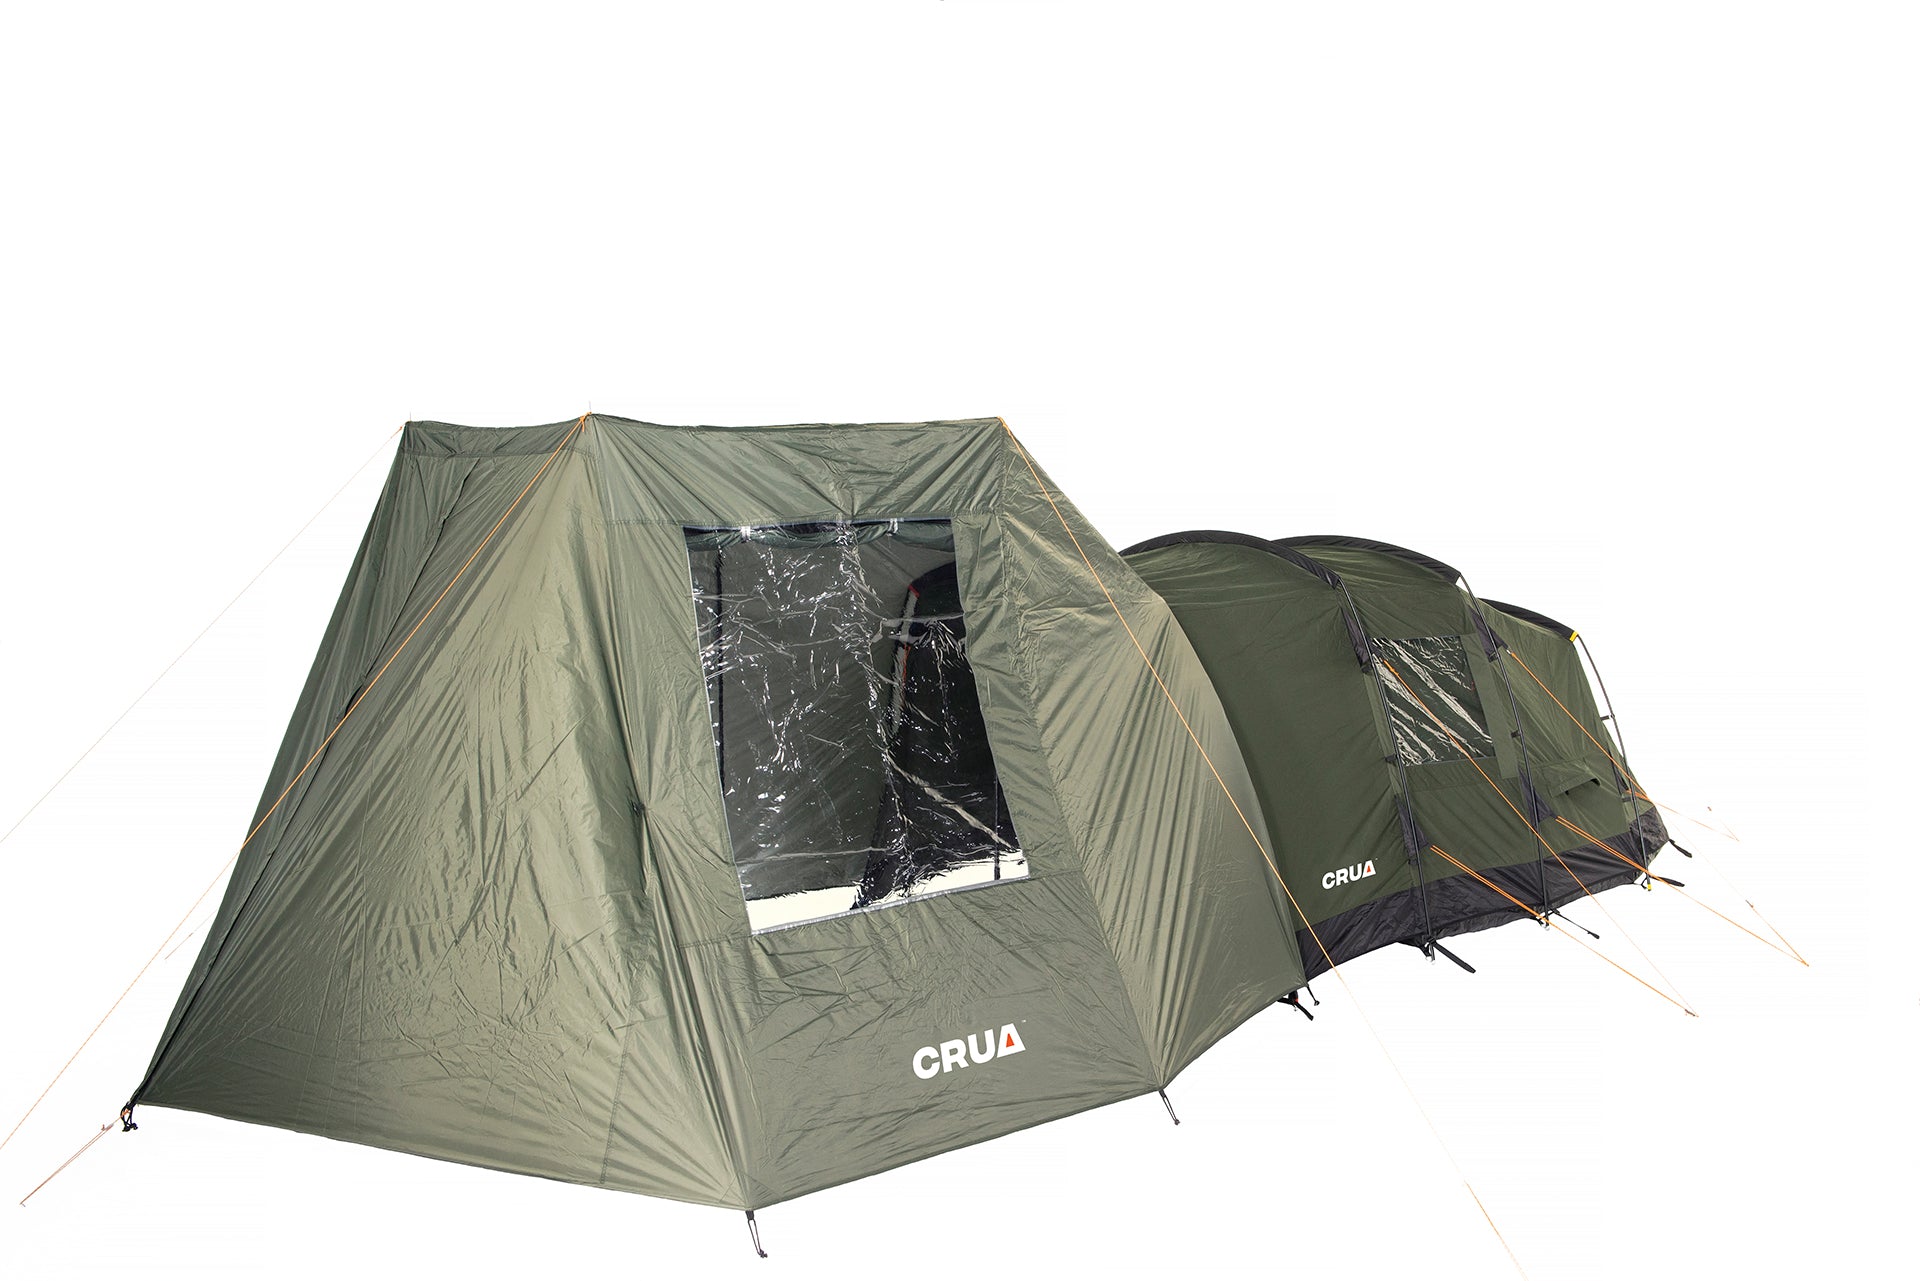 TRI | 3 PERSON INSULATED TUNNEL TENT - ALL WEATHER COMPATIBLE, WATERPROOF, SPACIOUS SHELTER WITH ENHANCED COMFORT AND DURABILITY